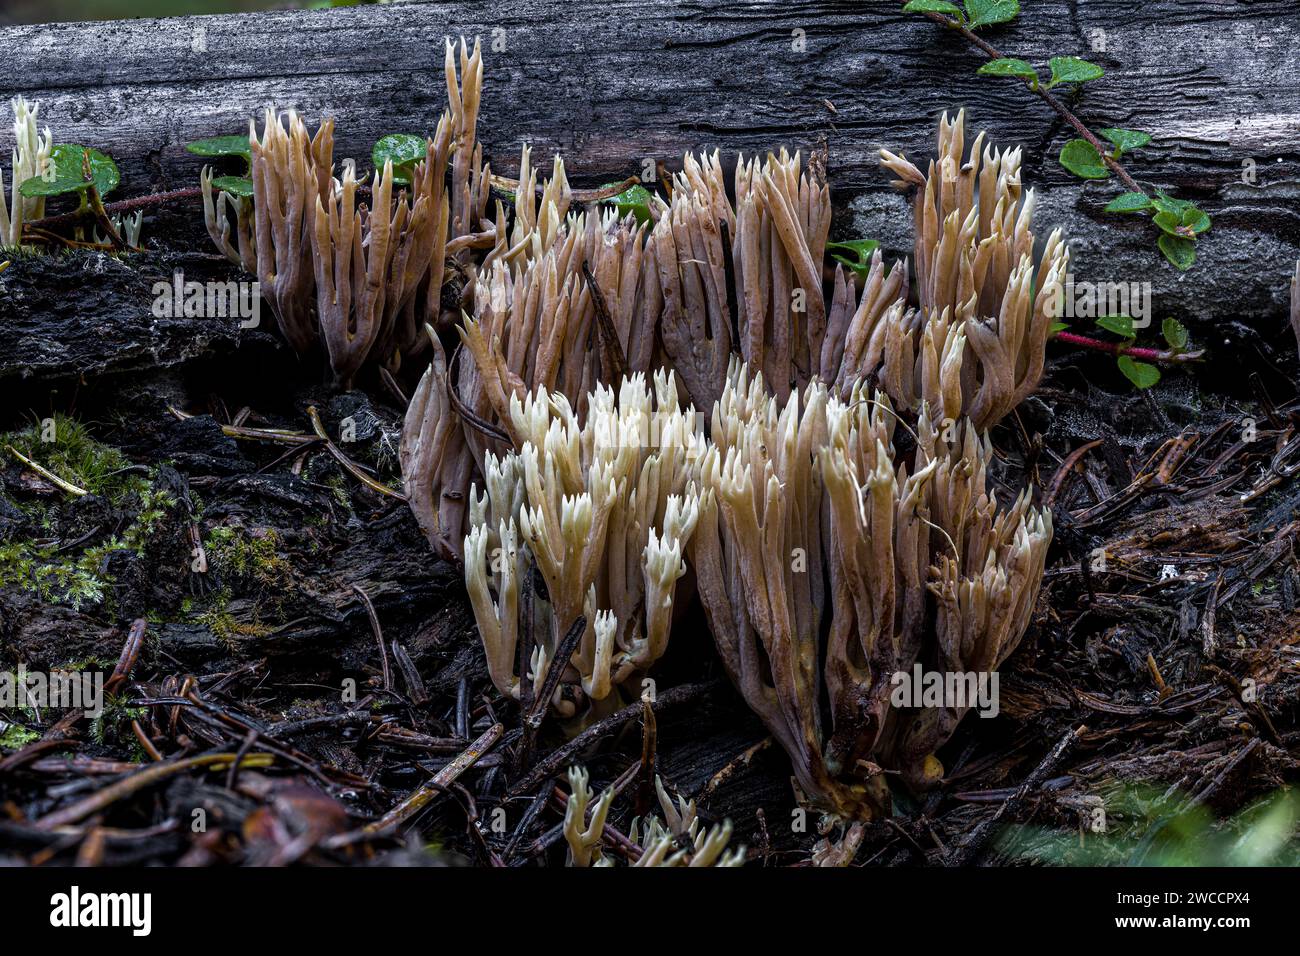 Strict-branch Coral (Ramaria stricta) Fungus Stock Photo